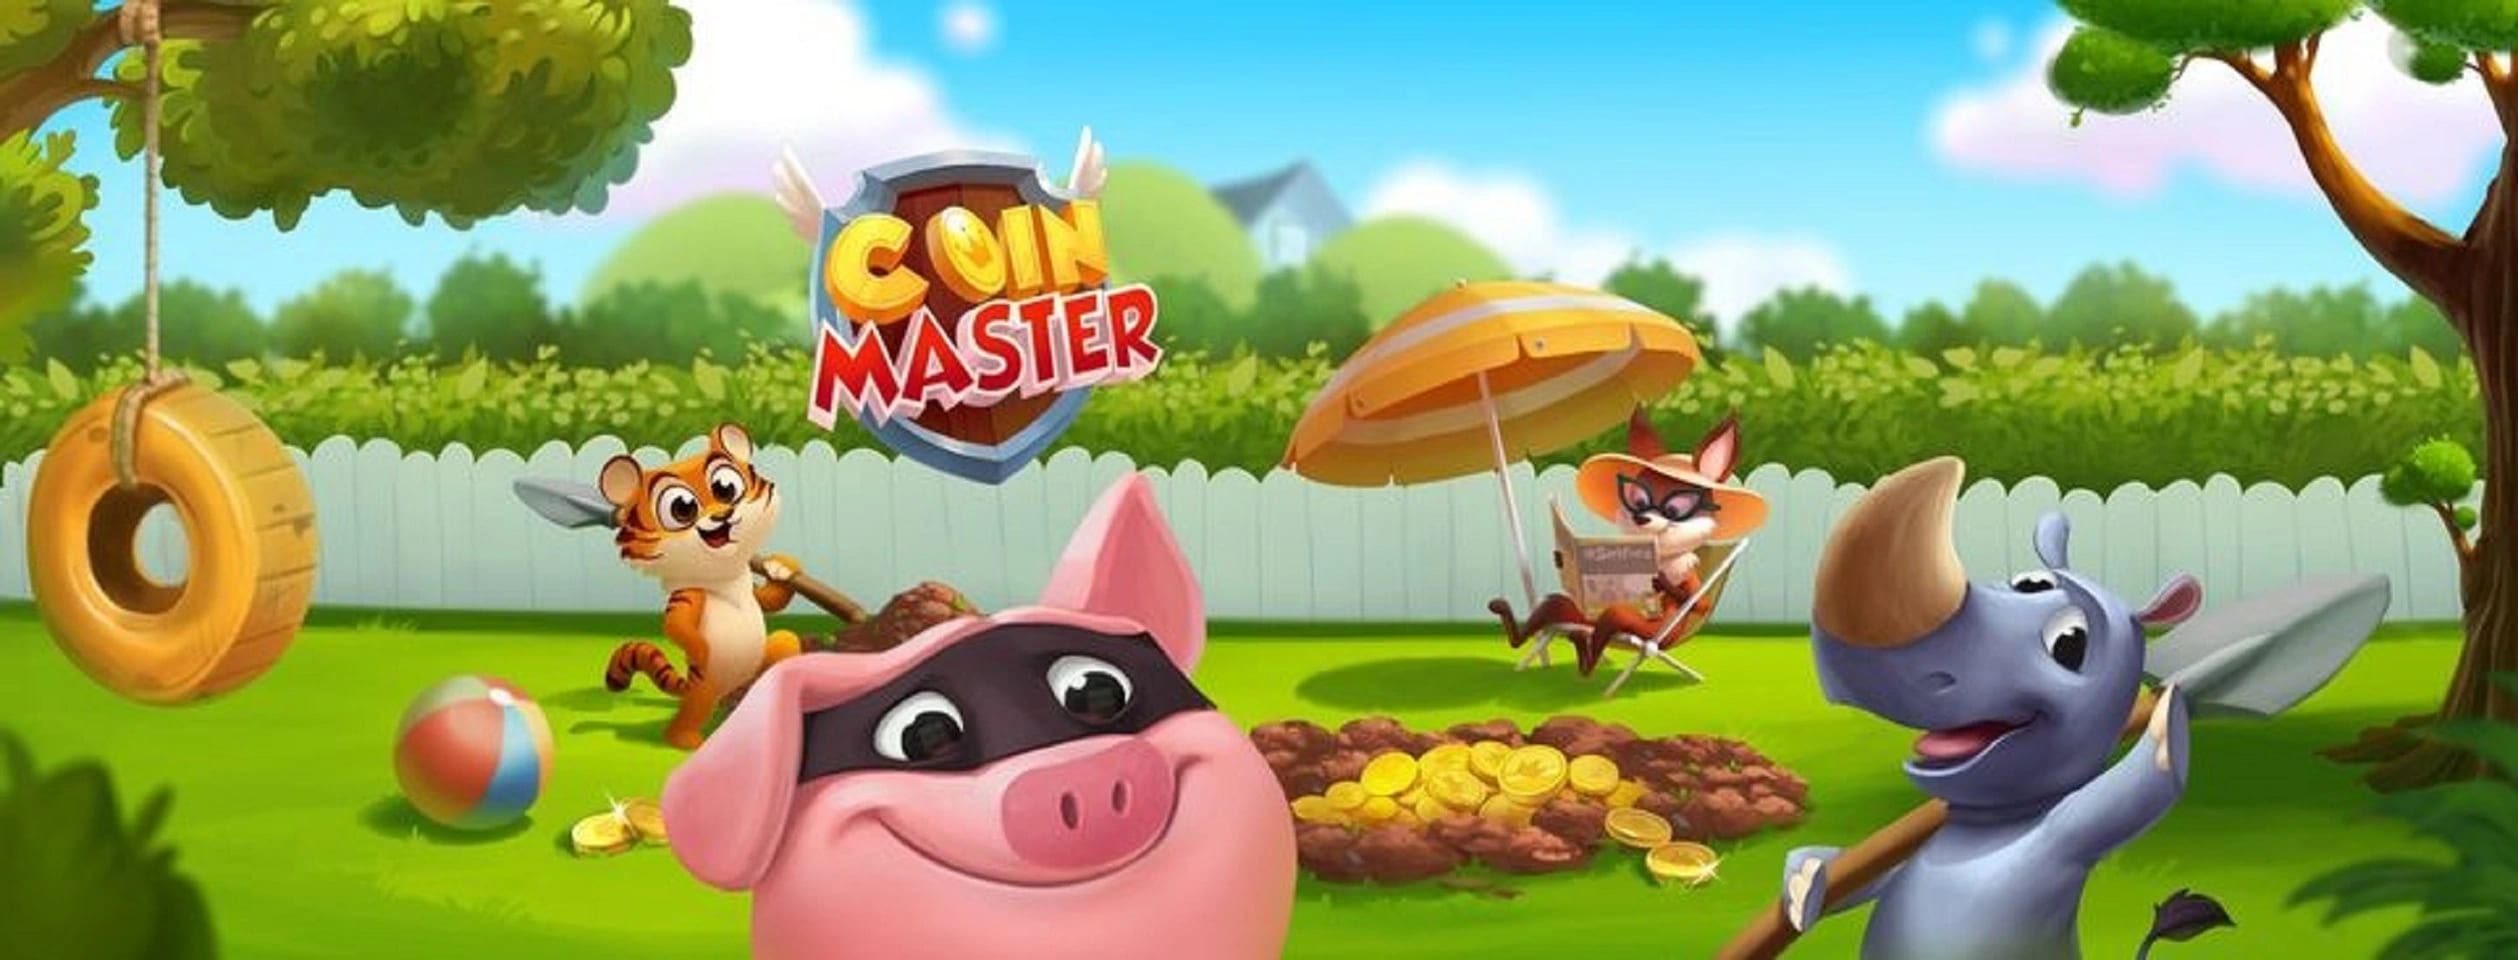 coin-master-download